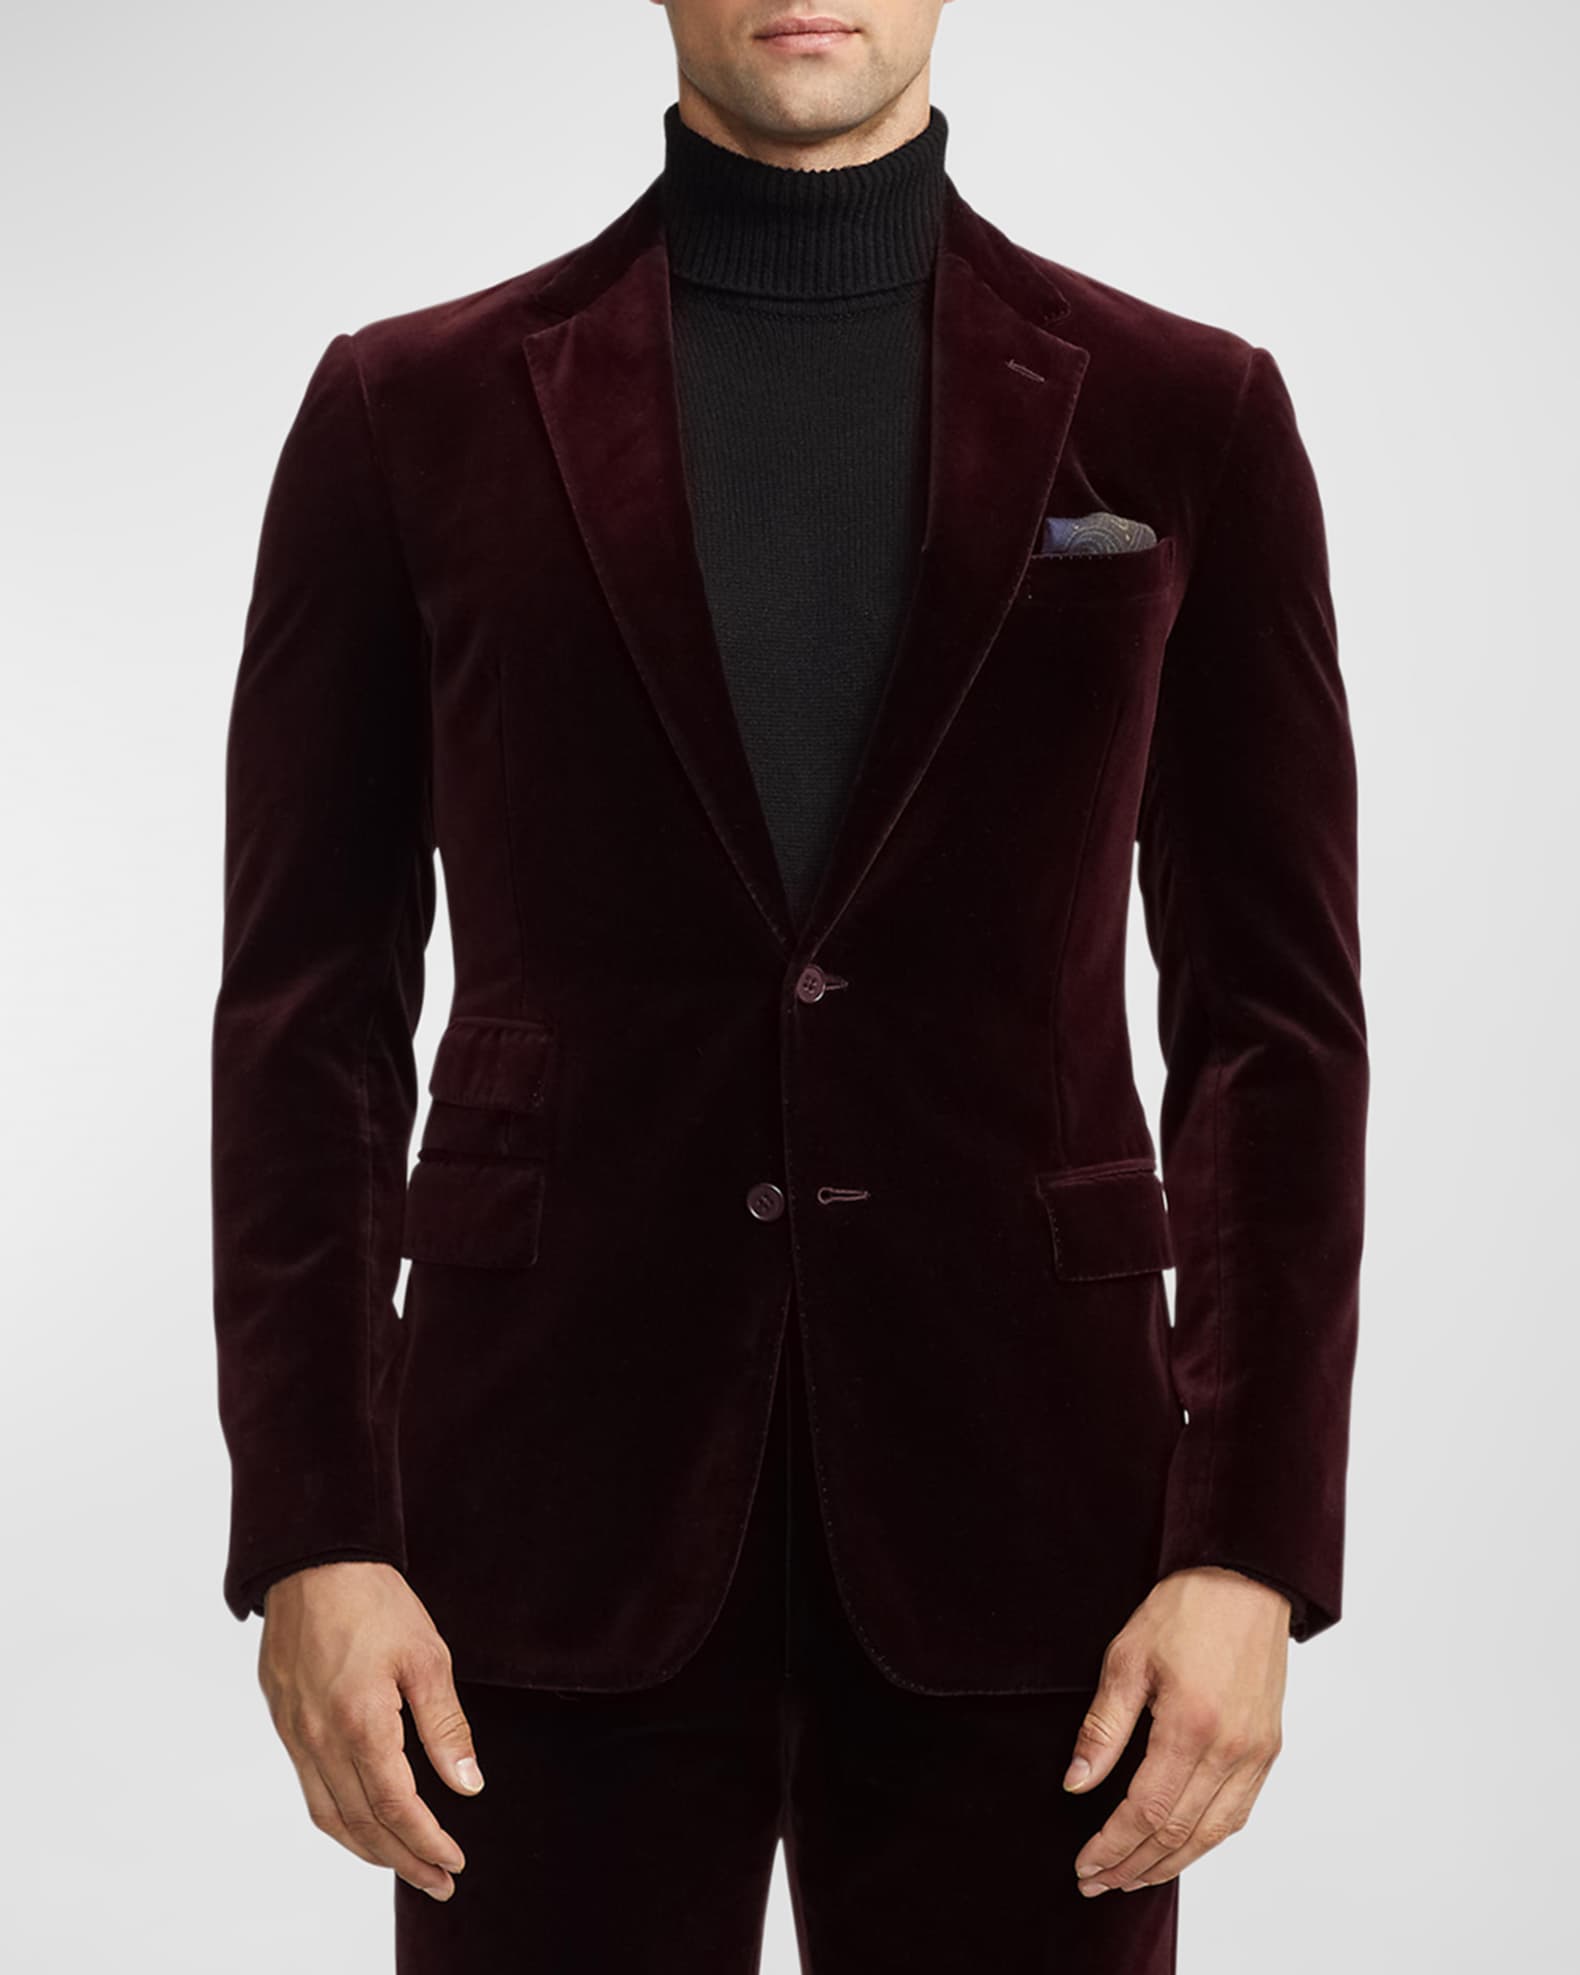 Red Single-breasted cotton-blend velvet suit jacket, Gucci